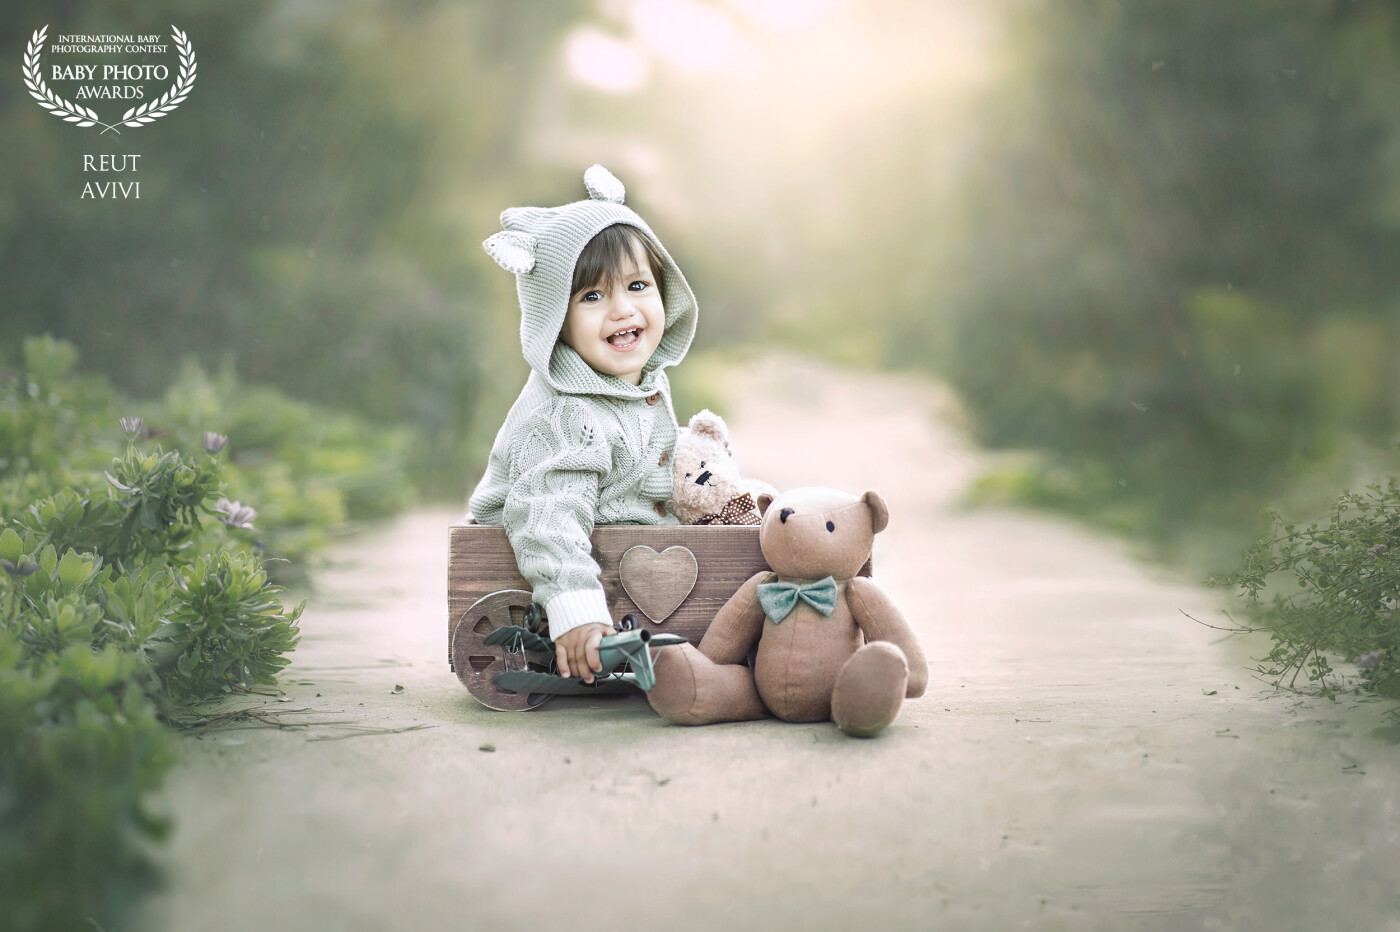 A one-year-old boy smiles sweetly in clothes adapted for him, happily sitting inside a wooden cart while leaving his teddy bear outside, adding a charming touch to the photo.